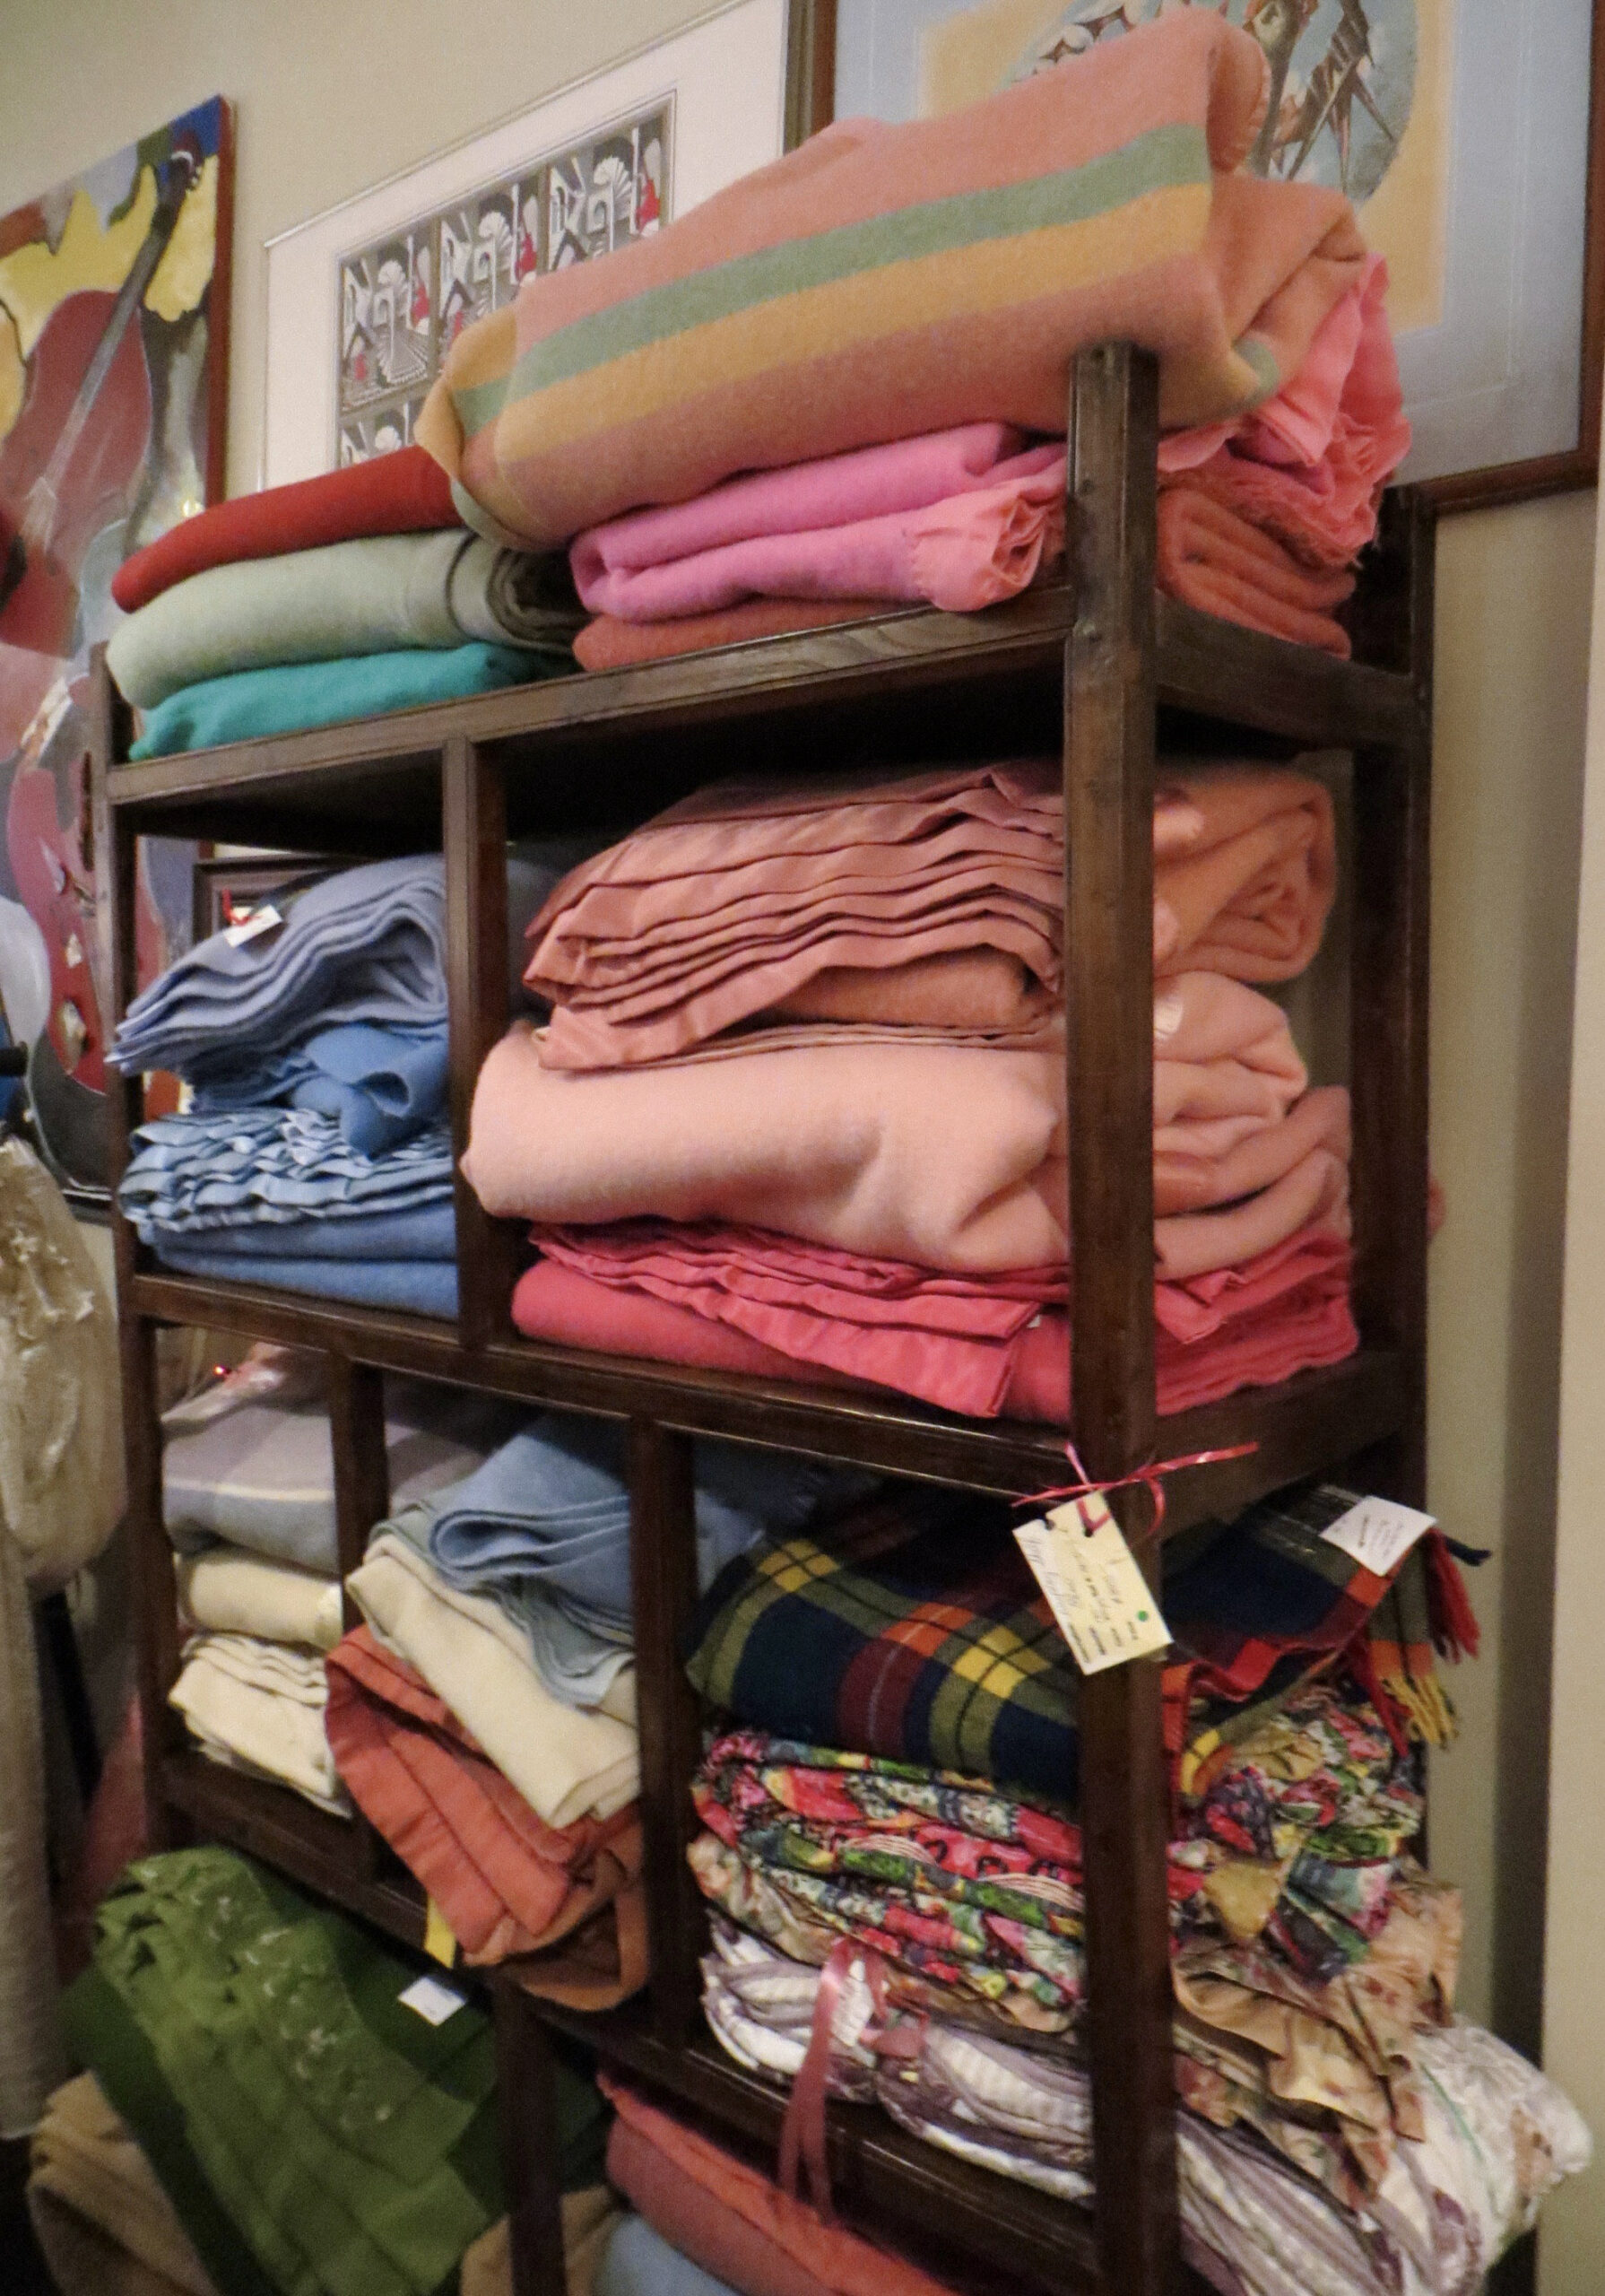 Wooden shelving holds an assortment of folded, colourful blankets.